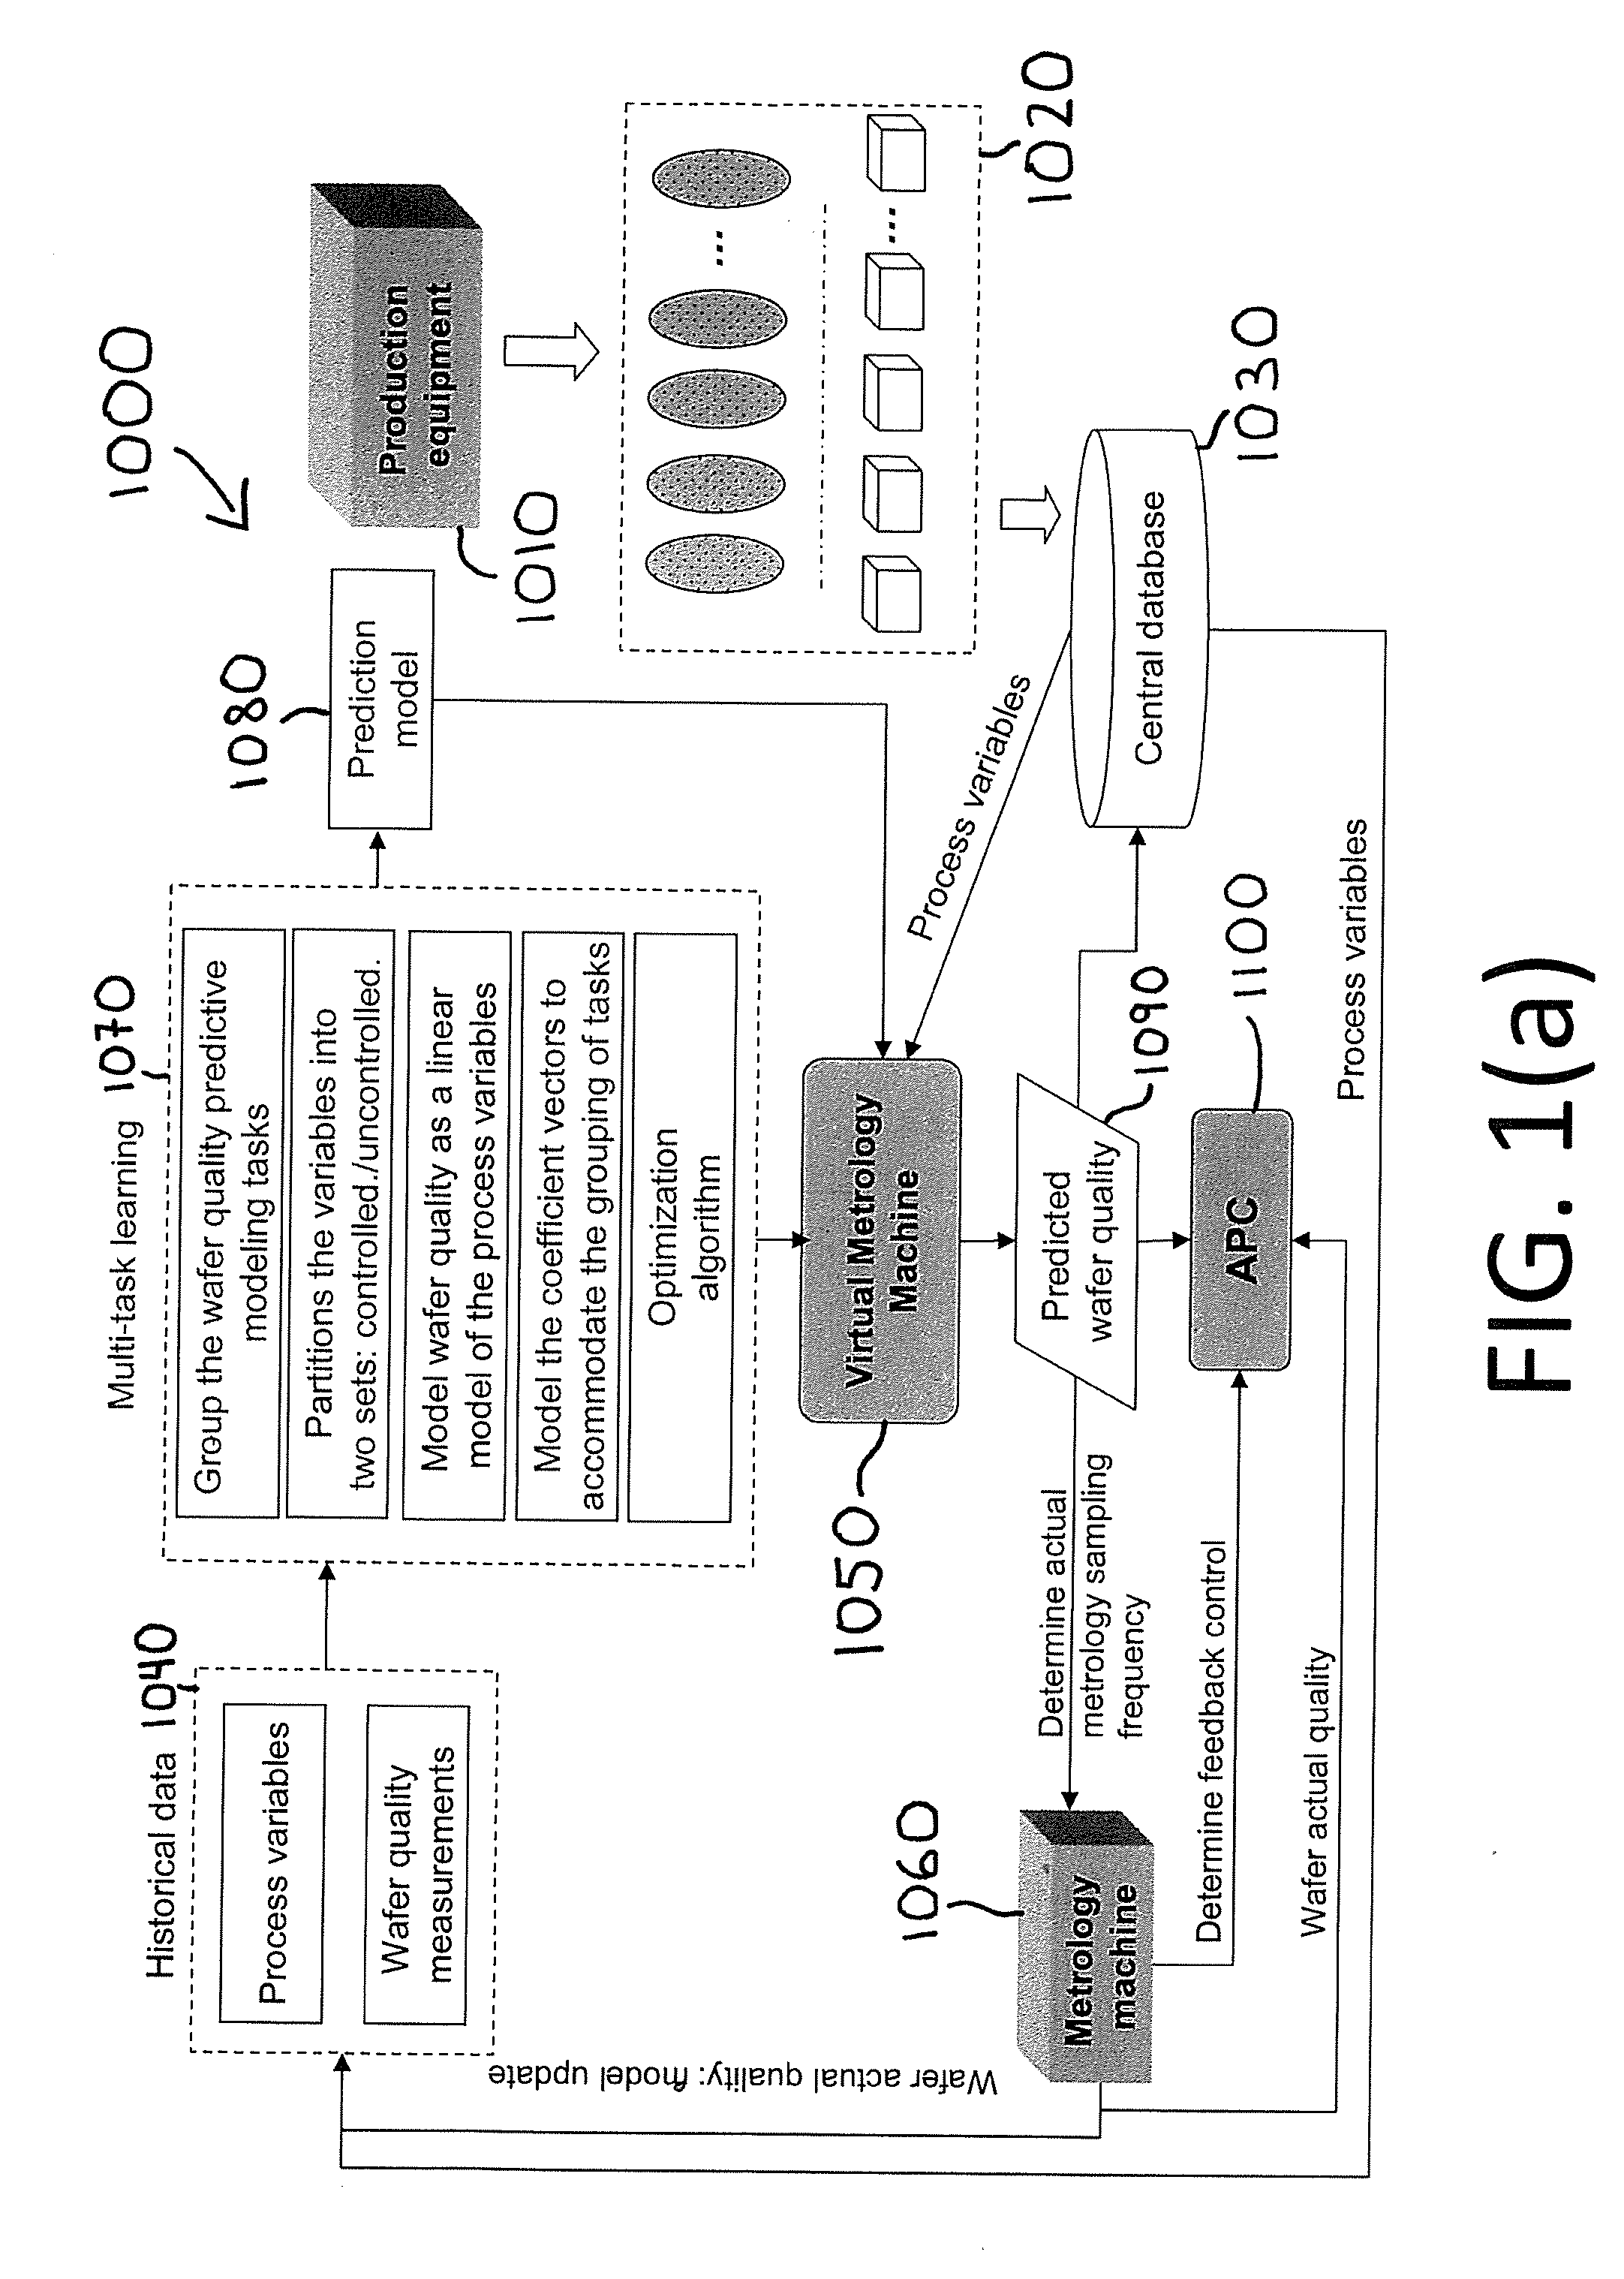 Method and System for Wafer Quality Predictive Modeling based on Multi-Source Information with Heterogeneous Relatedness